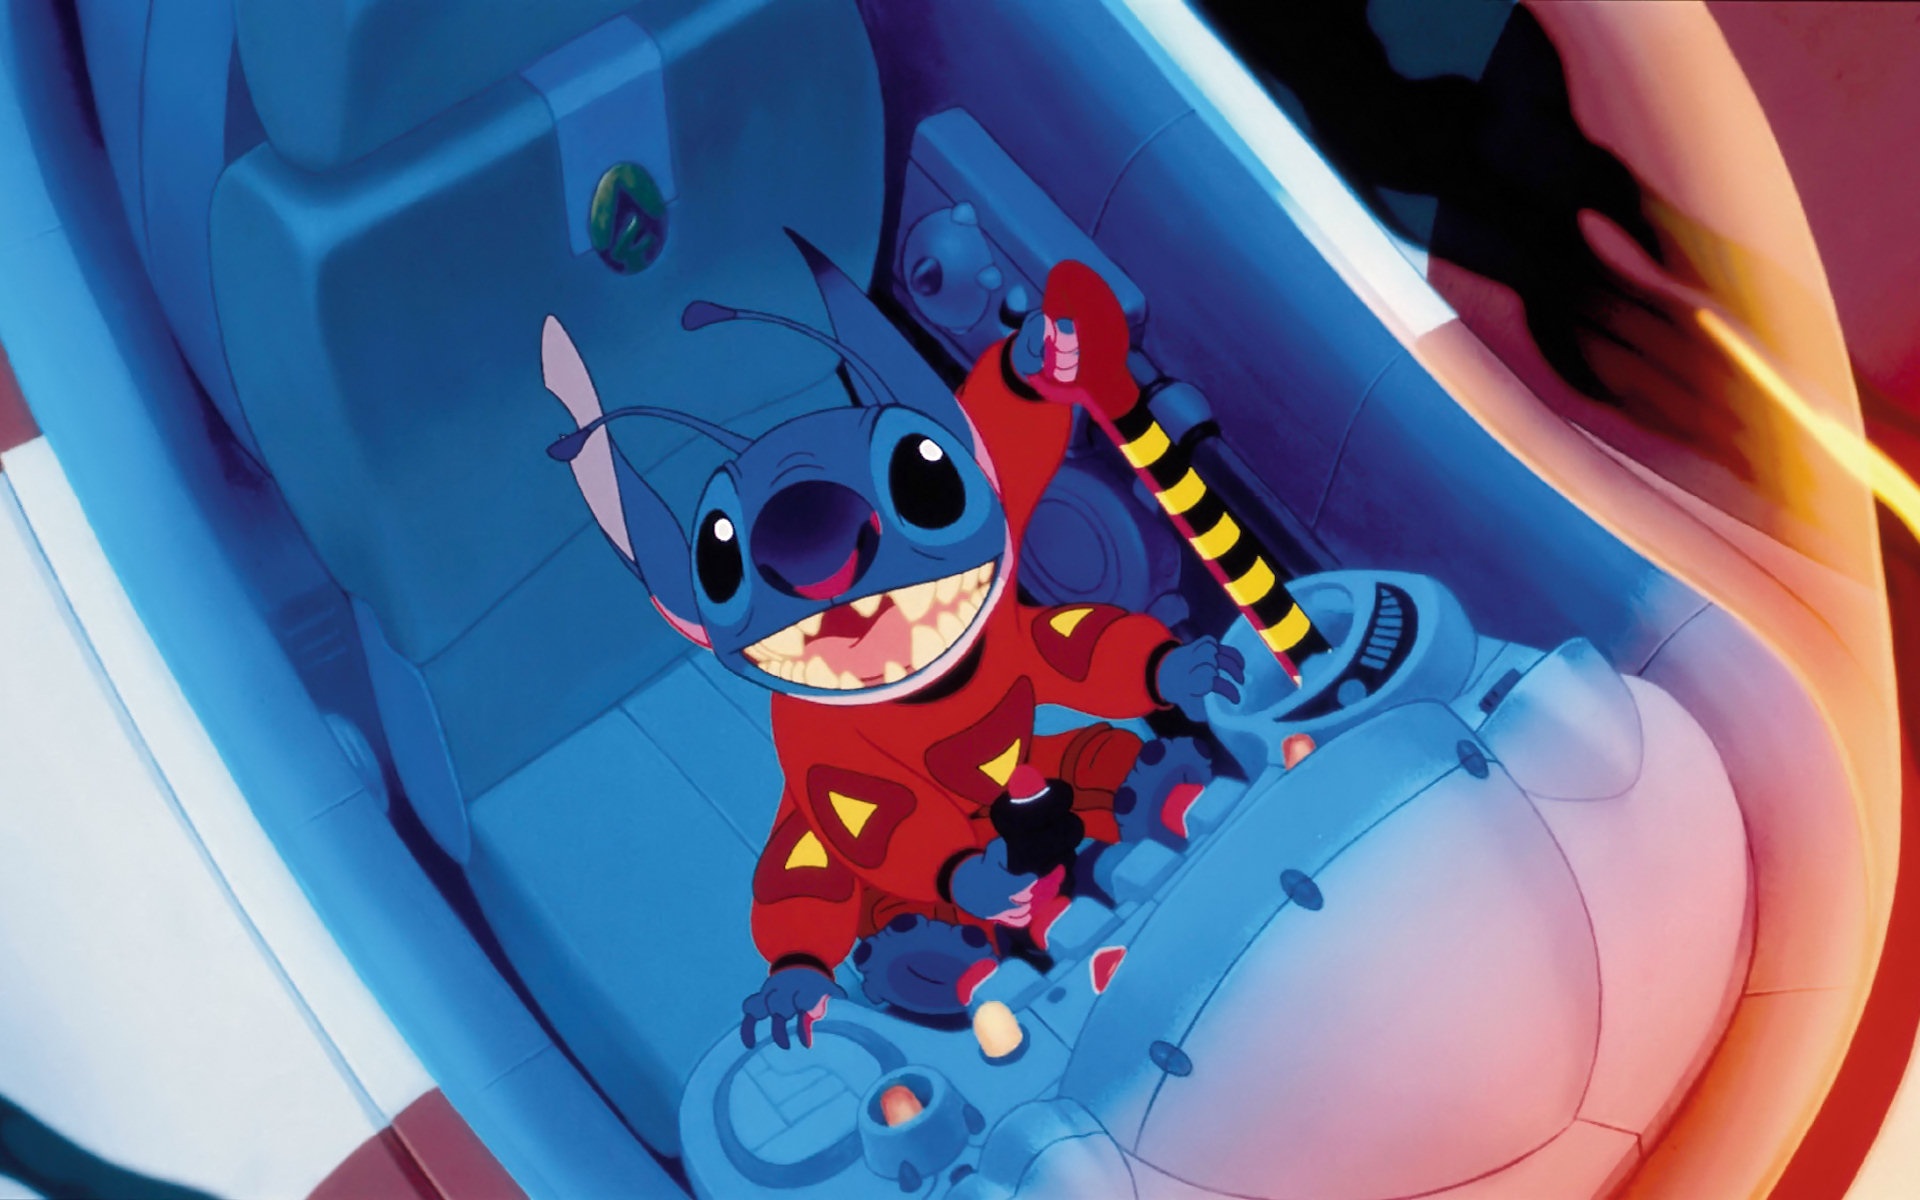 Cartoon Stitch Wallpapers | Wallpapers, Backgrounds, Images, Art ...